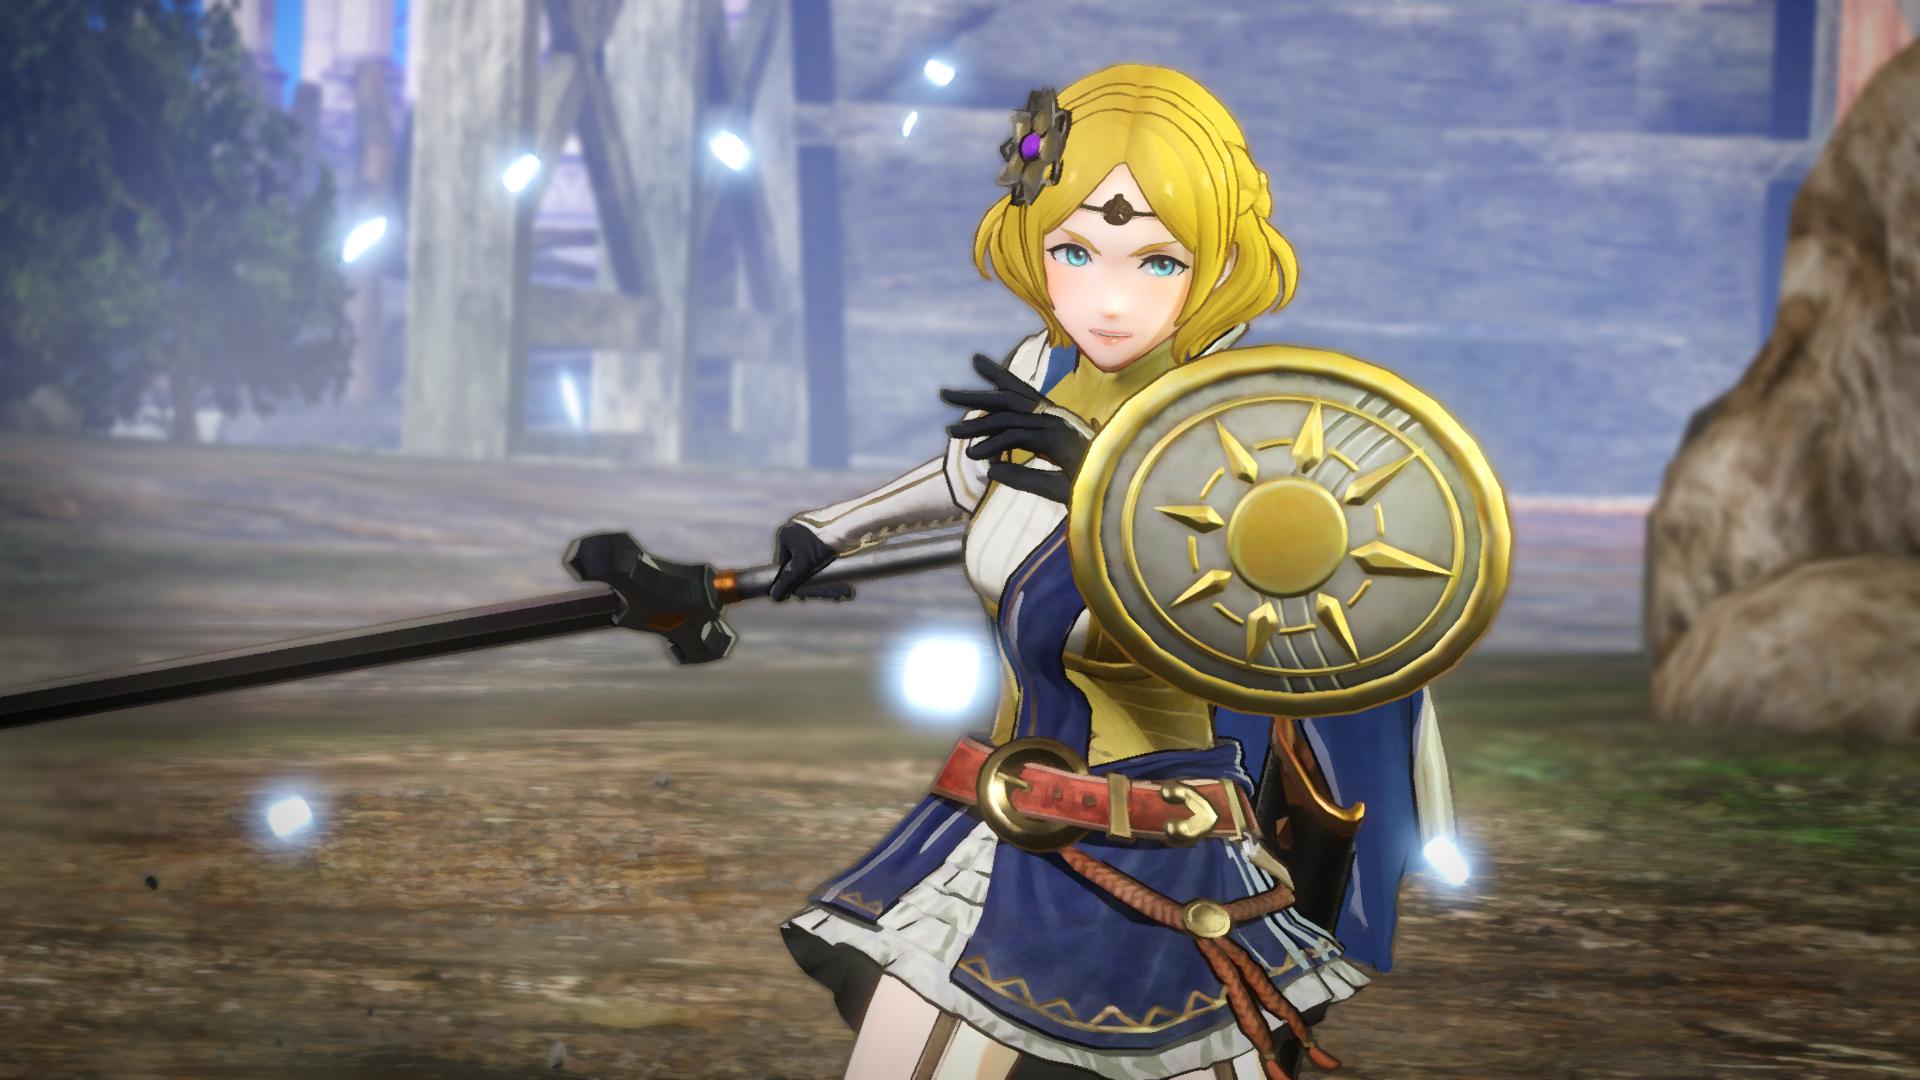 Image for Fire Emblem Warriors feels true to the source despite its bombastic style